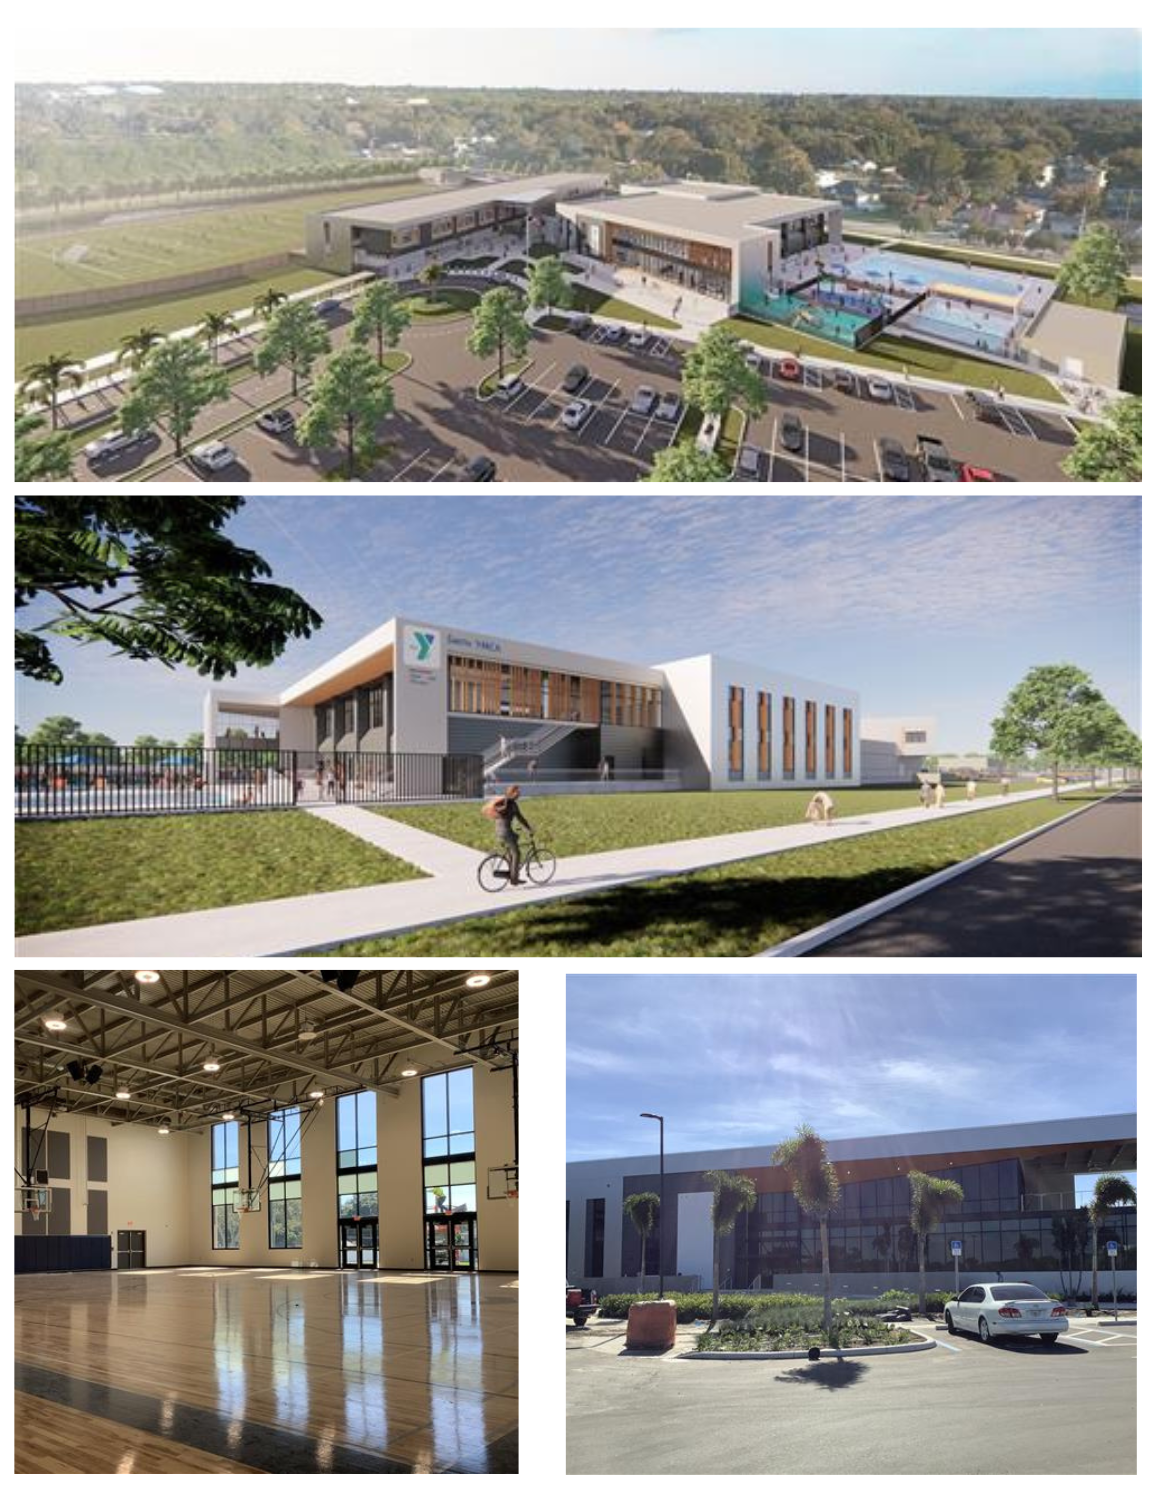 New St Petersburg Middle School shows 4 pictures of the outside and inside of the new Mangrove Middle School